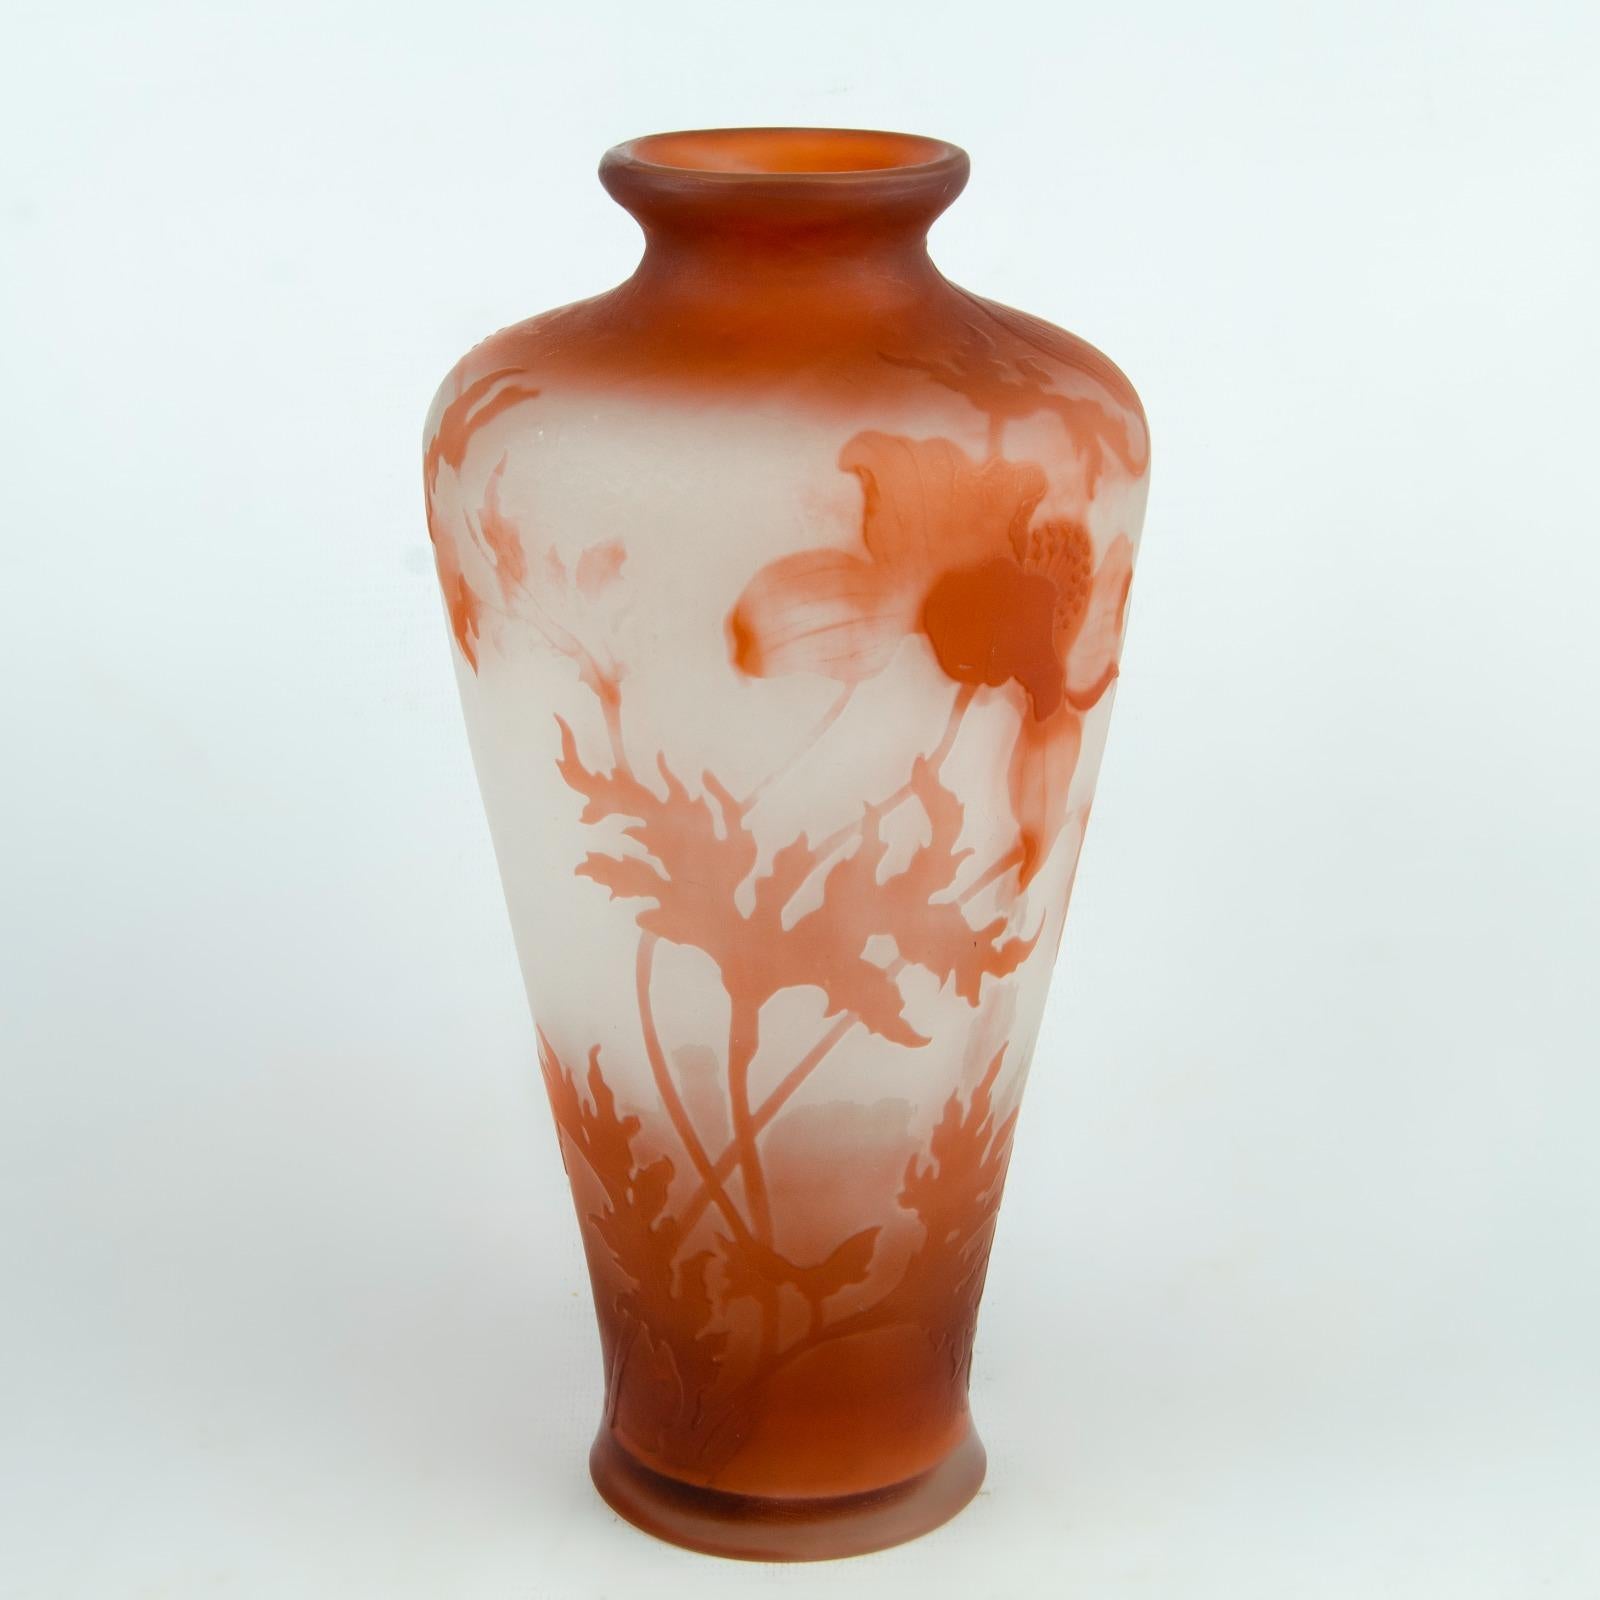 Emile Galle (1846-1904) Nnancy Vase Balaustre
In colorless glass with inclusion of sandy glass powder
Cammeowork with floral decor
Cammeo signature
